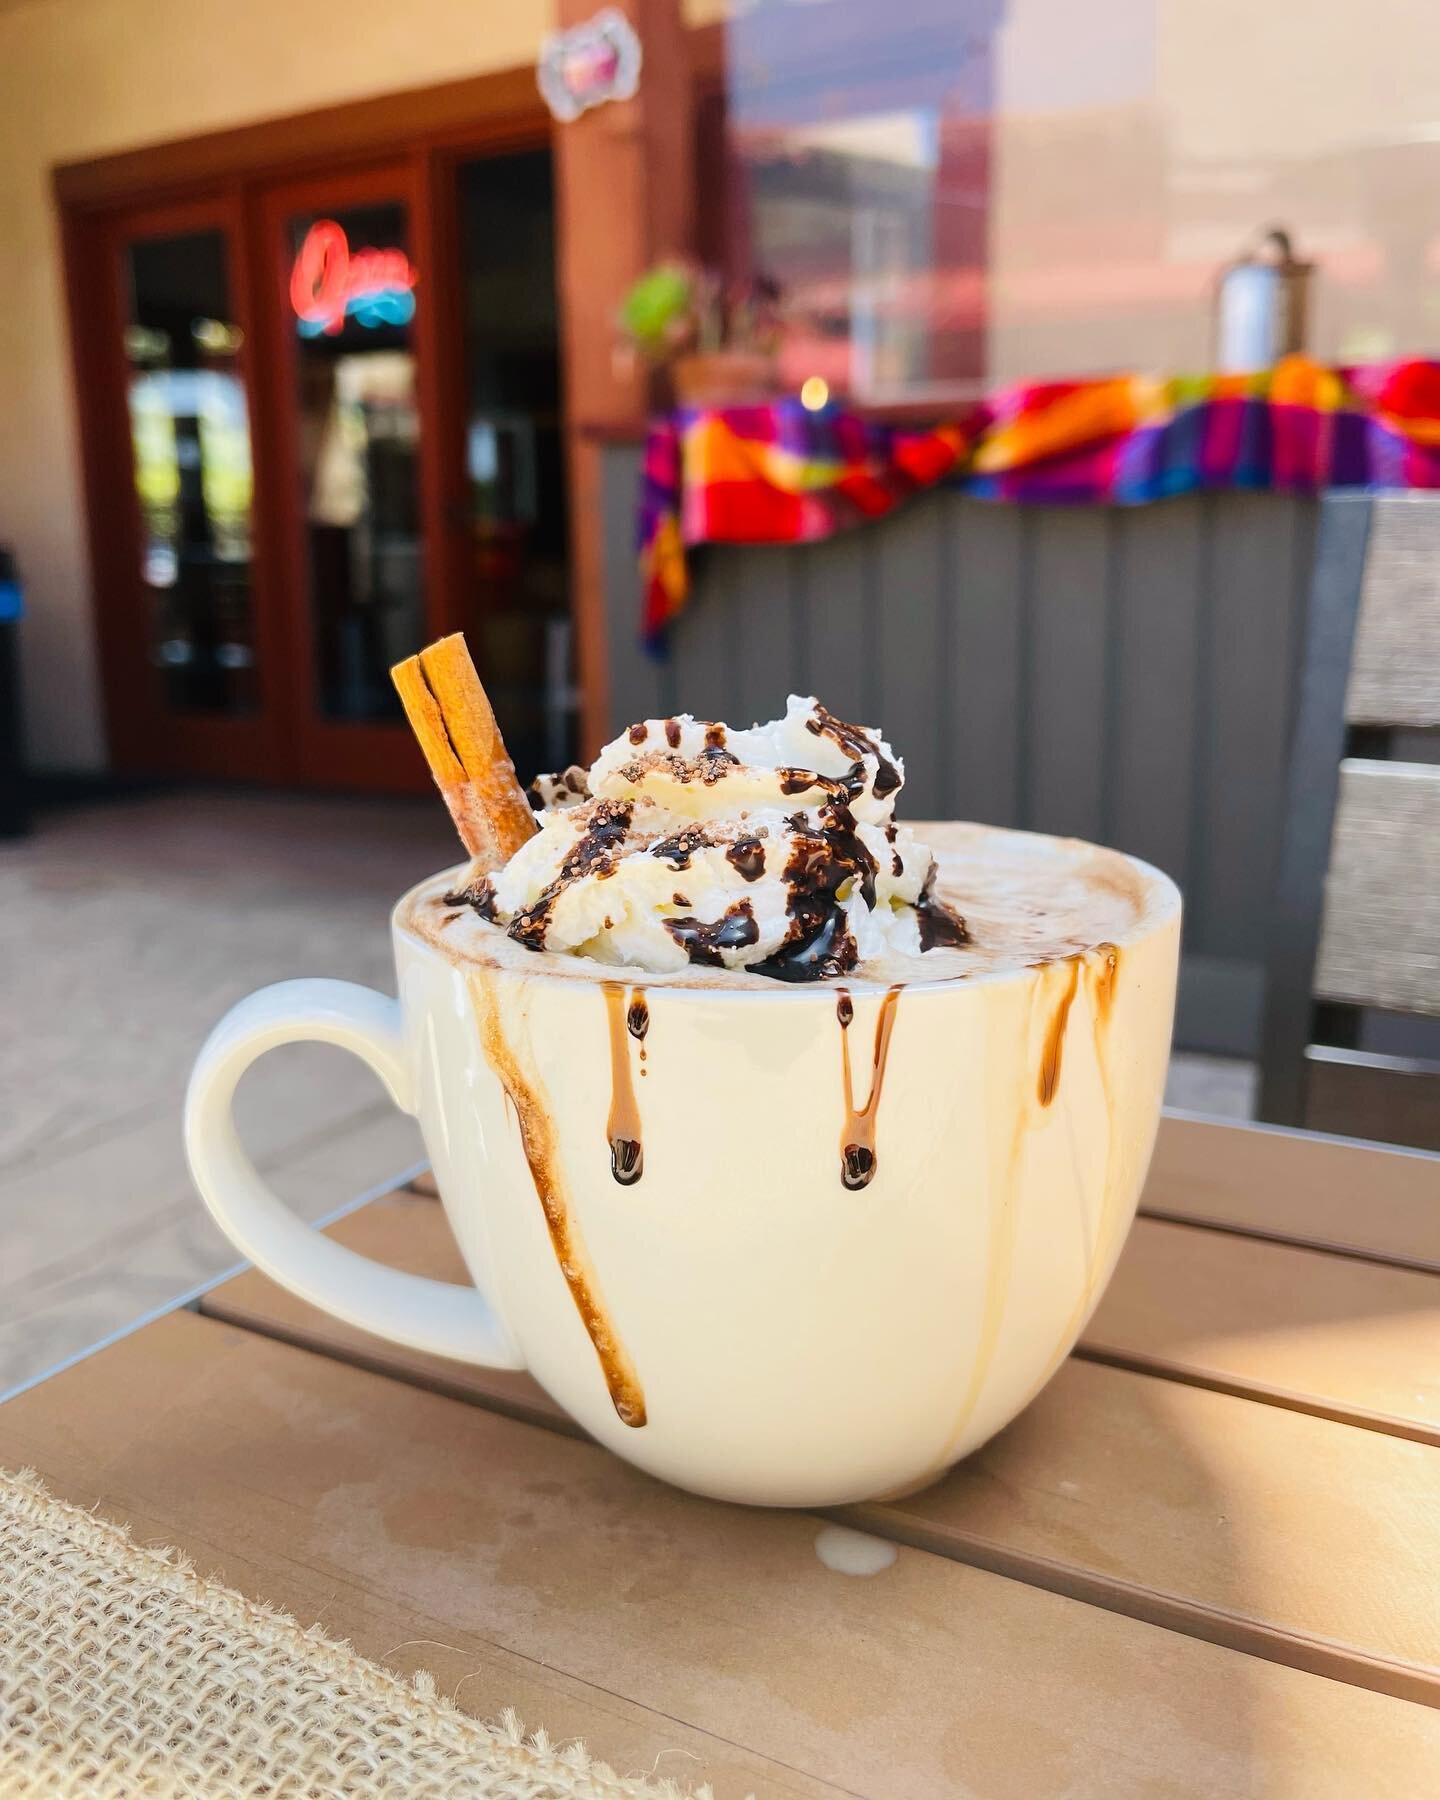 Mexican Hot Chocolate ! Chocolate Abuelita 👵 just got even better! Deliciousness at its max! Make it a Mexican Mocha with a shot of expresso ❤️ #oldtownsandiego #mexicanmocha☕️ #keemacafe #sdfoodie